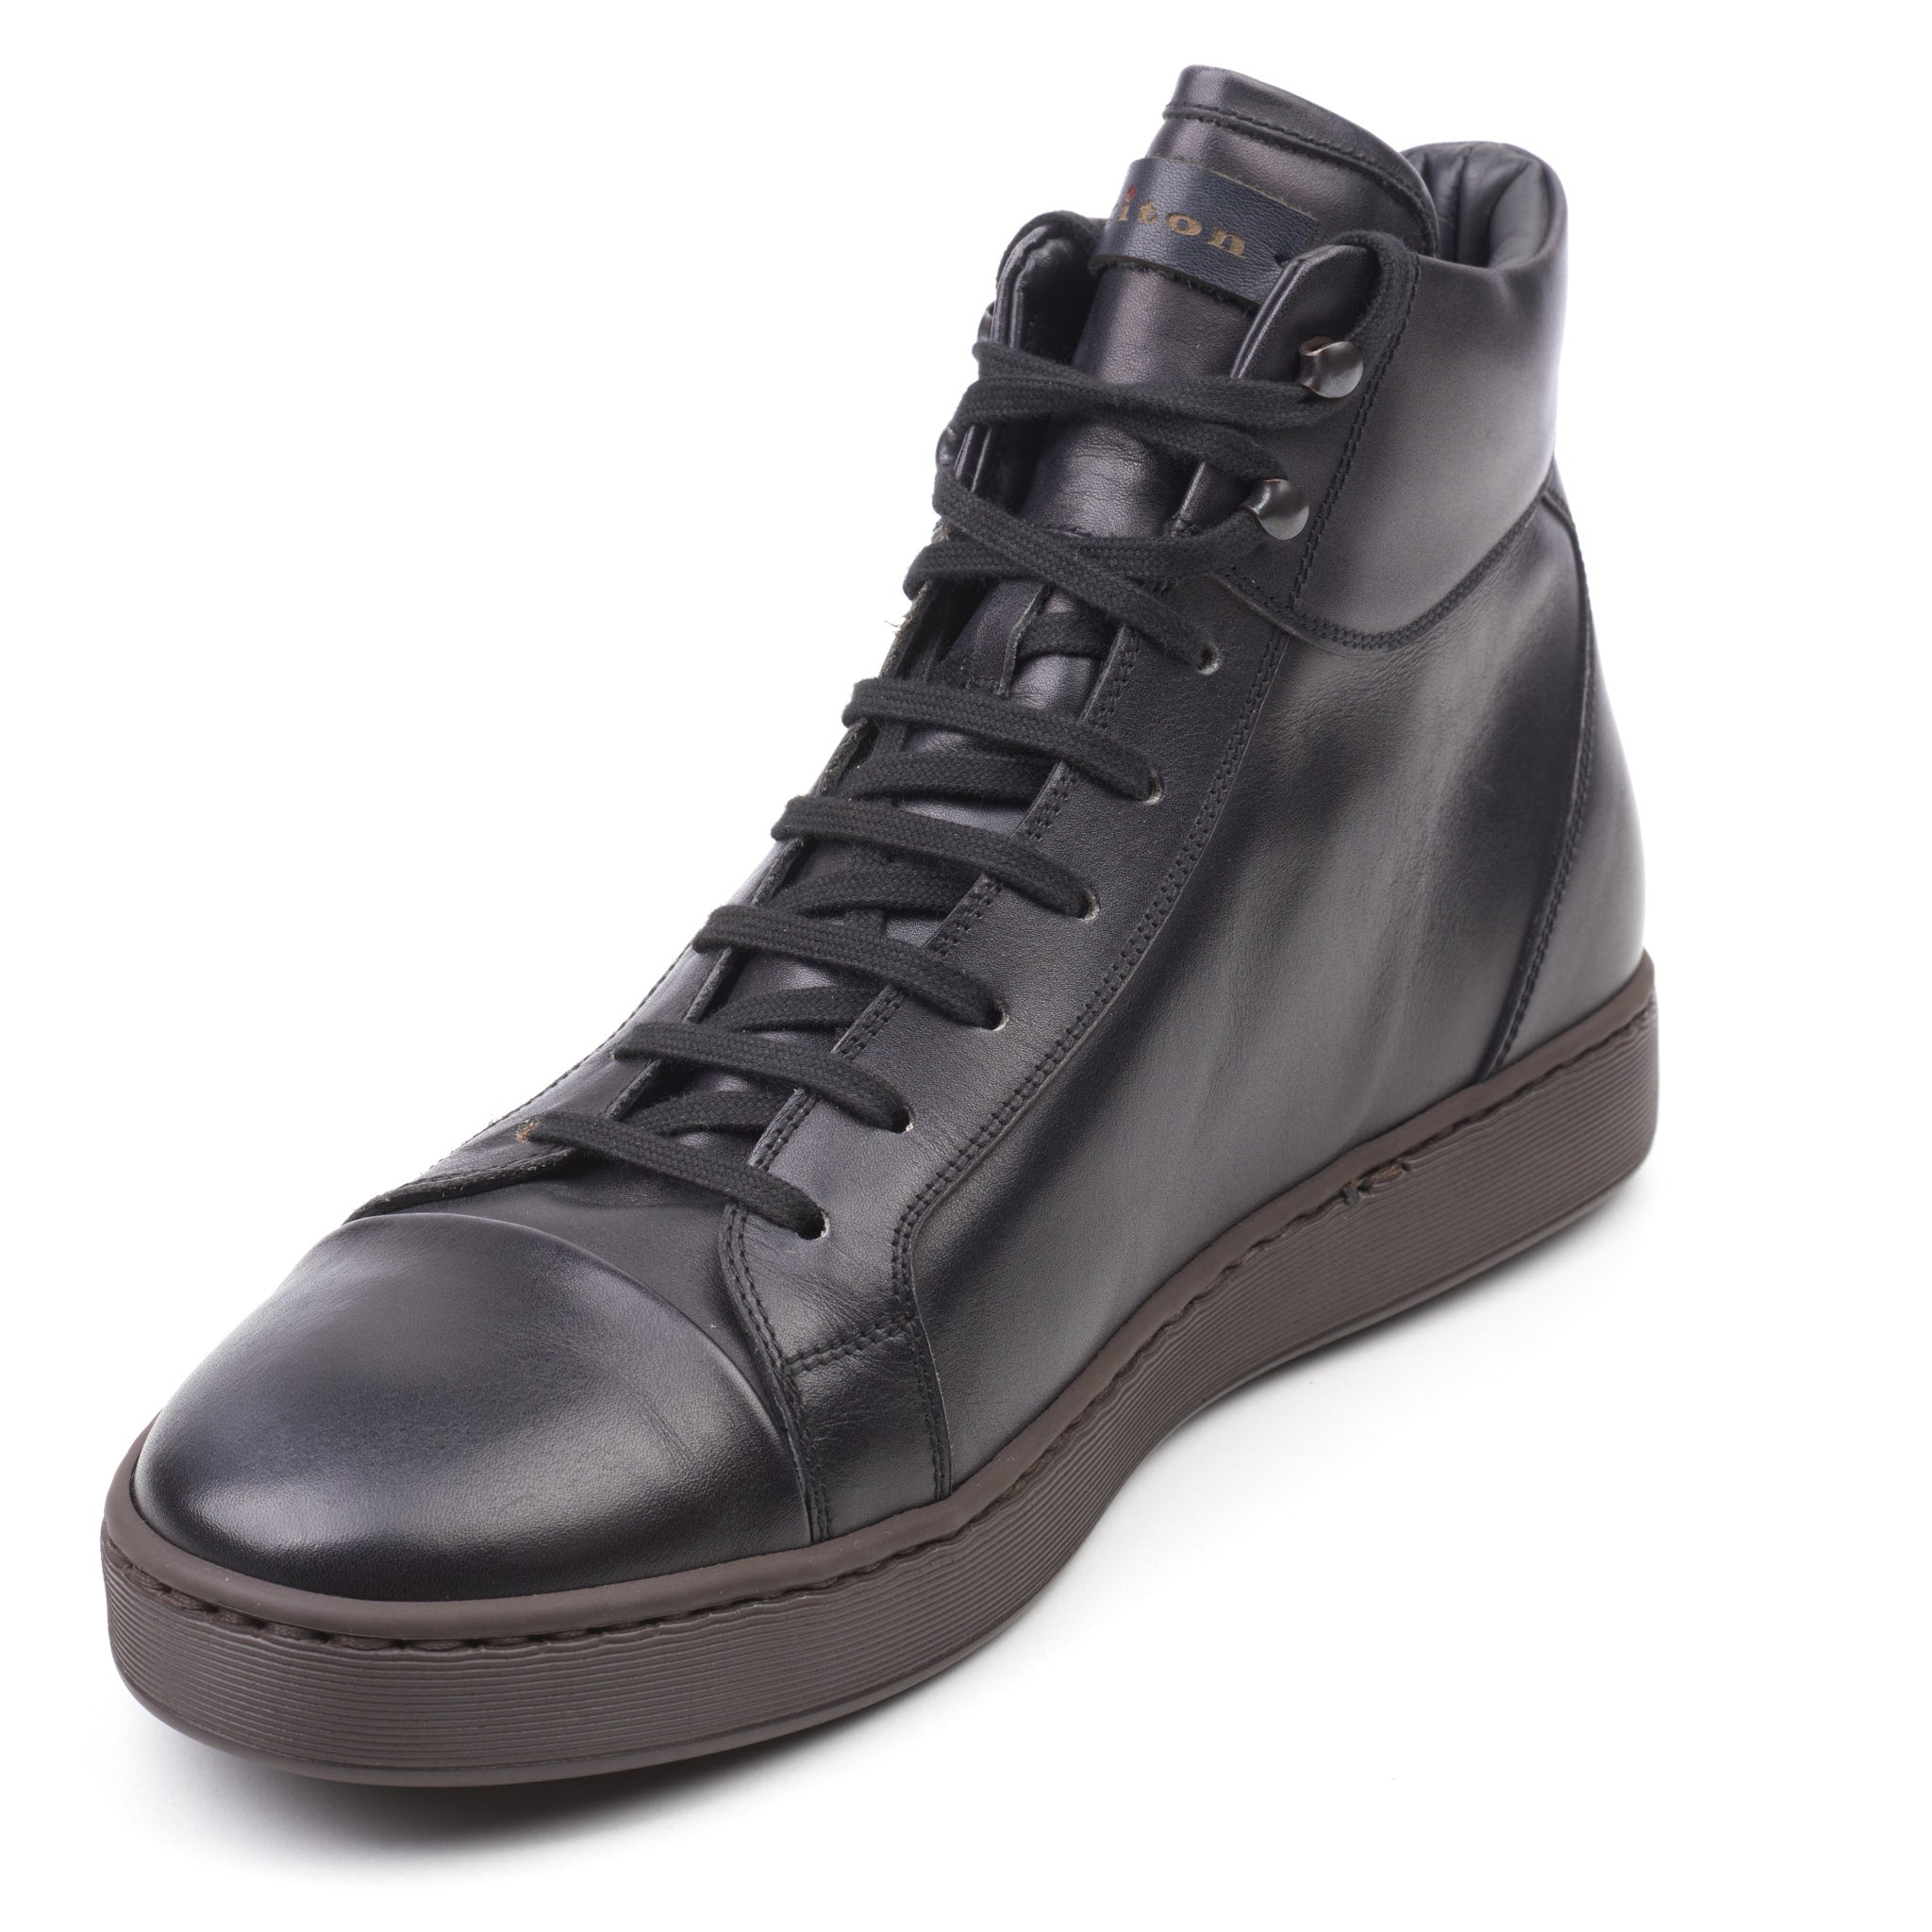 KITON Black Calfskin Leather High-Top Sneaker Boots Shoes NEW with Box KITON